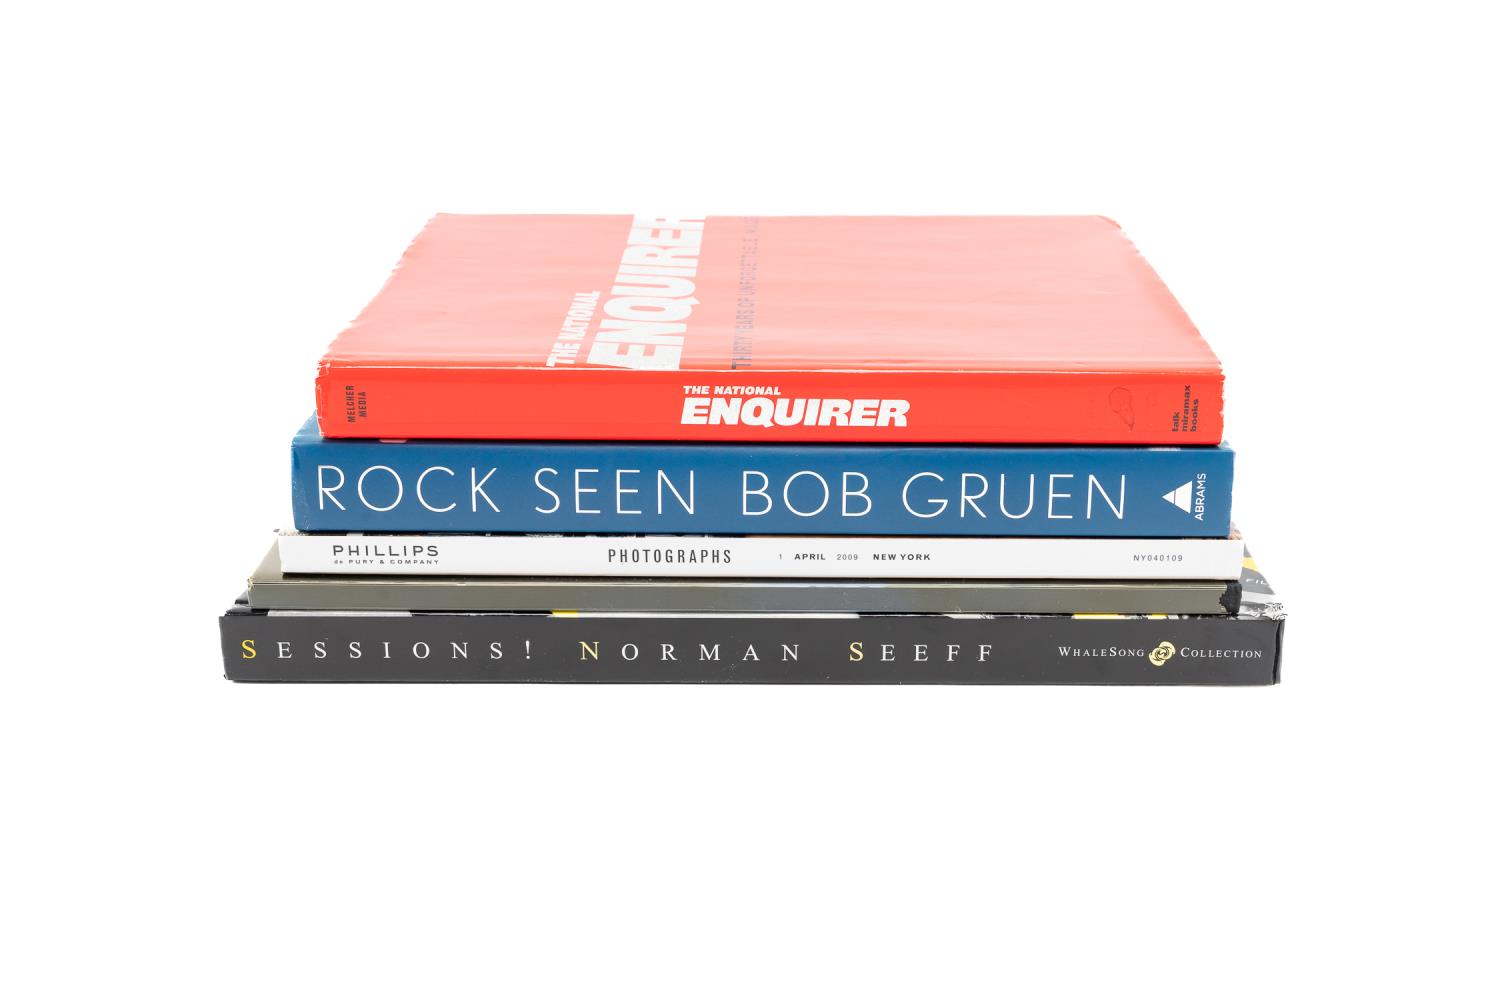 FIVE BOOKS ON ROCK AND SEPTEMBER 2f9aca